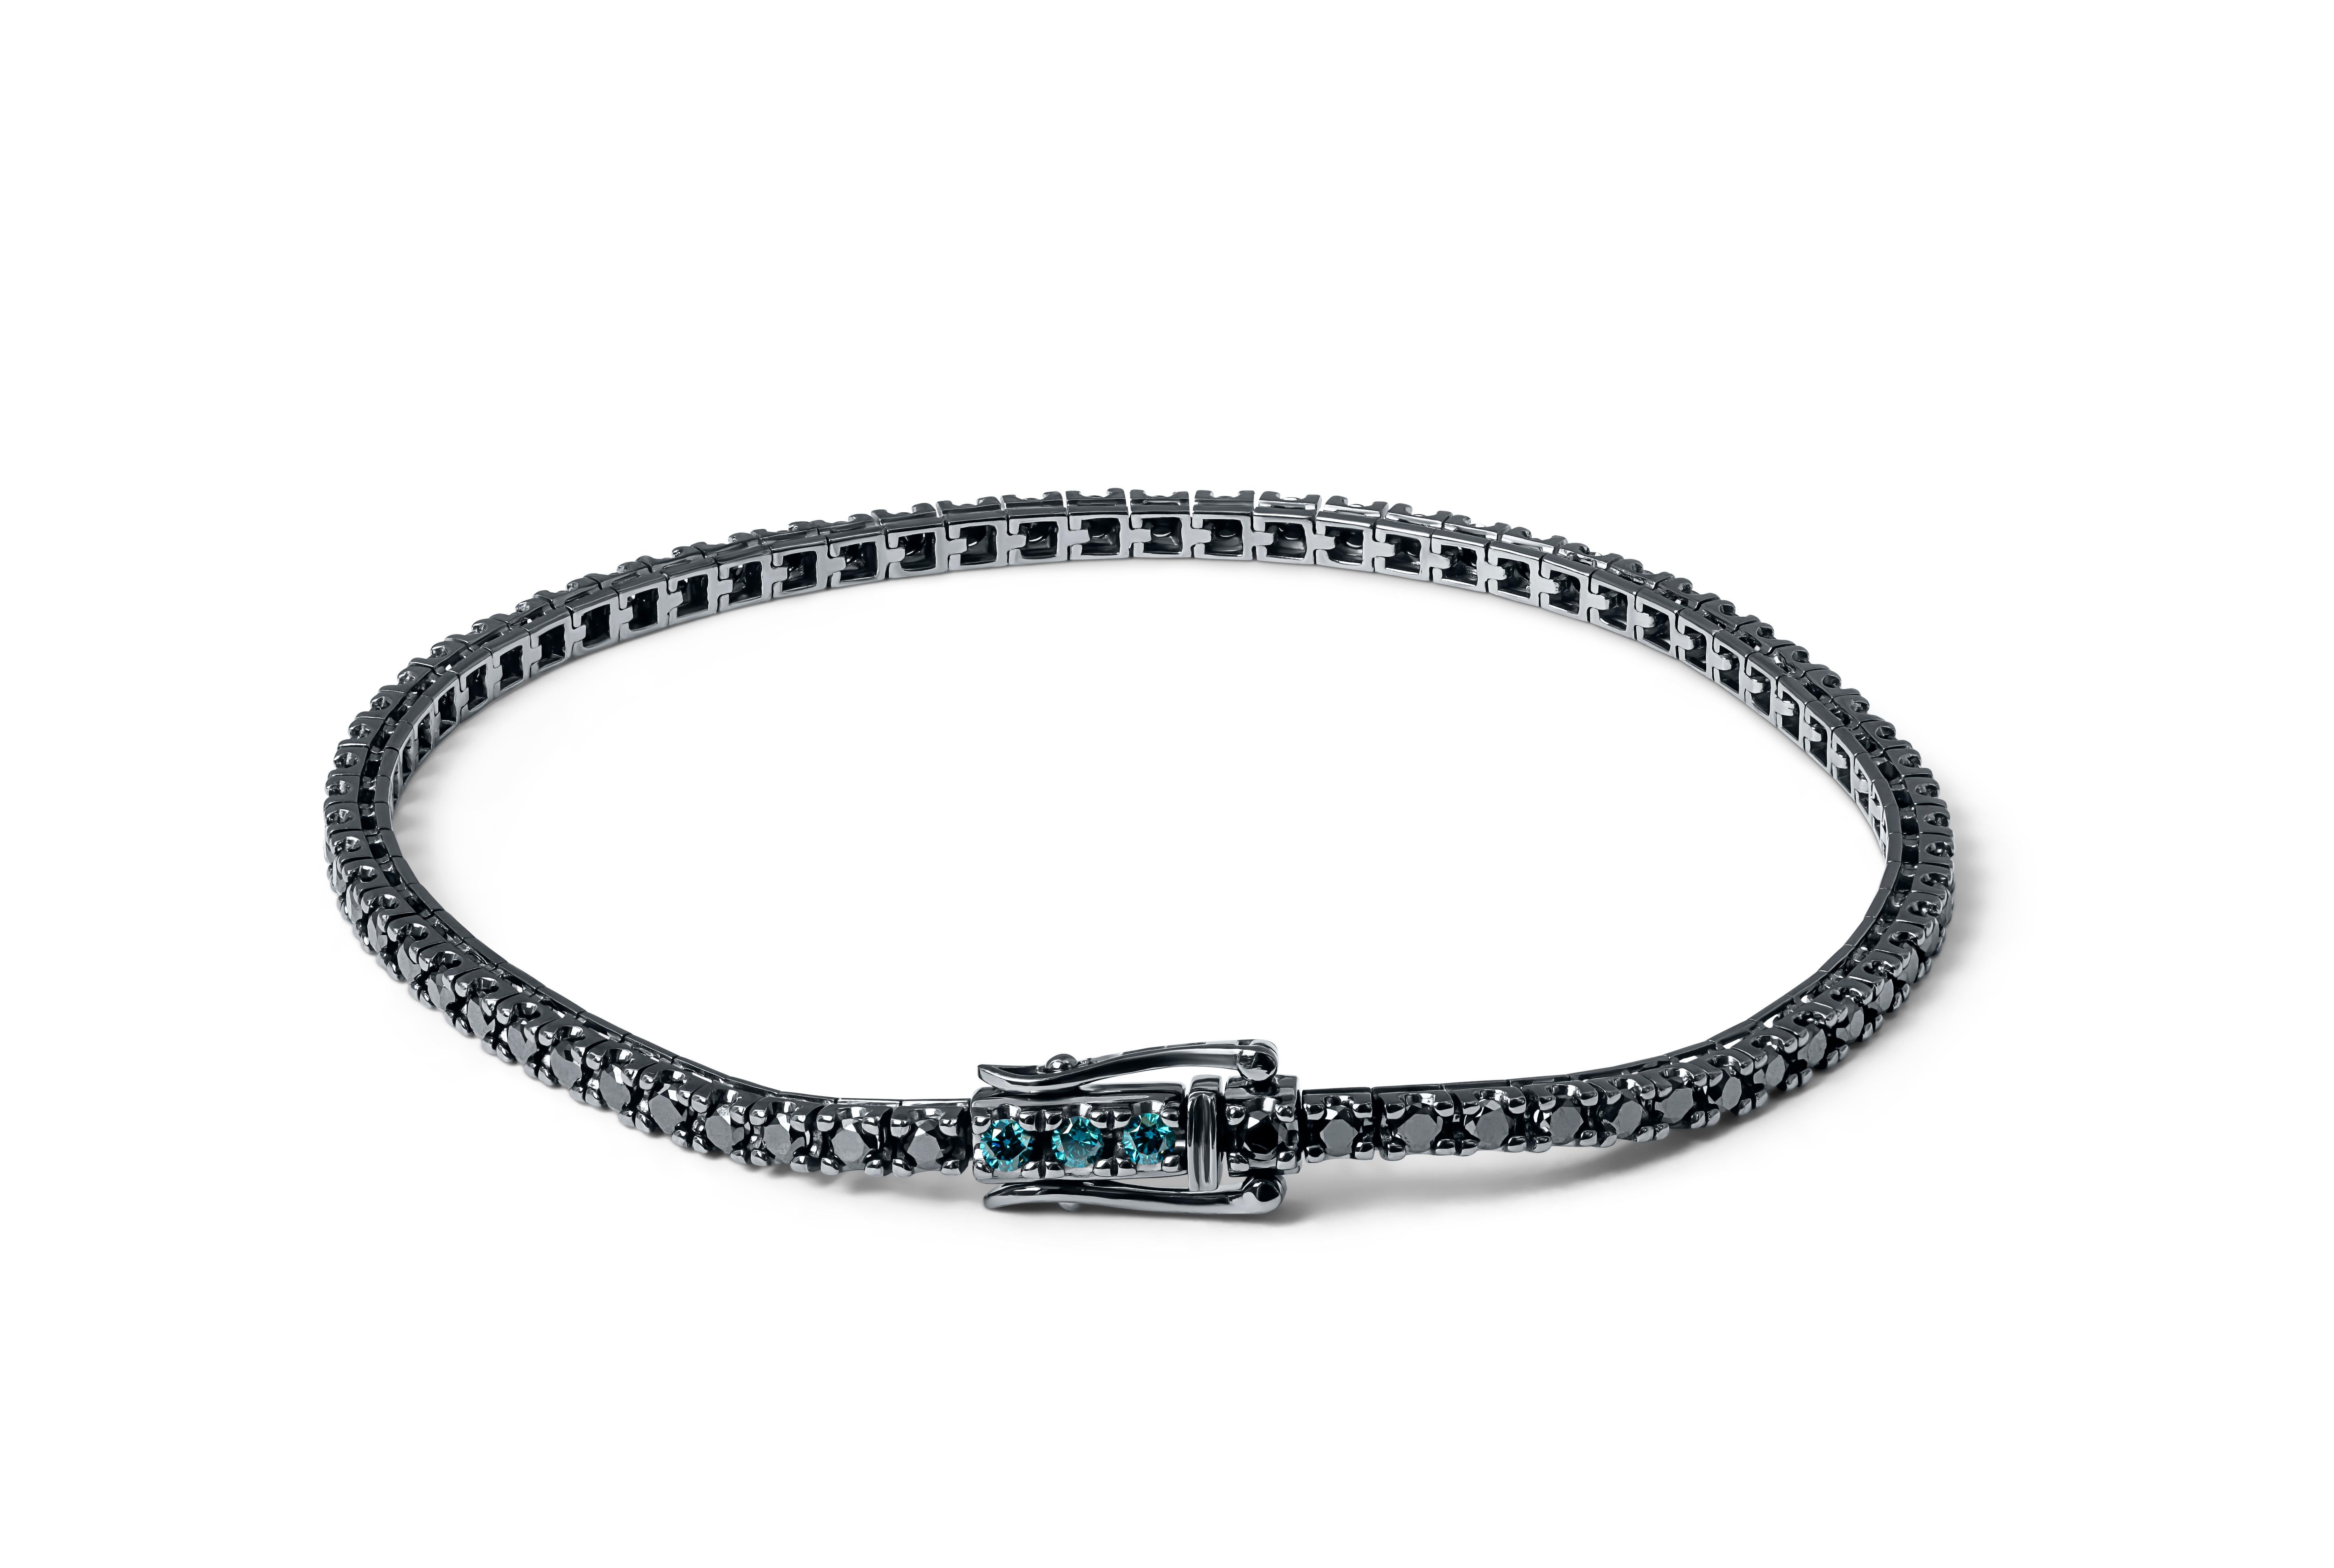 Tennis Bracelet in Black, Blue Diamonds with Black Rhodium Plated 18K White Gold

Tateossian continues to explore and find beauty in traditional diamonds which for years have lent themselves to original and pioneering designs. This tennis bracelets